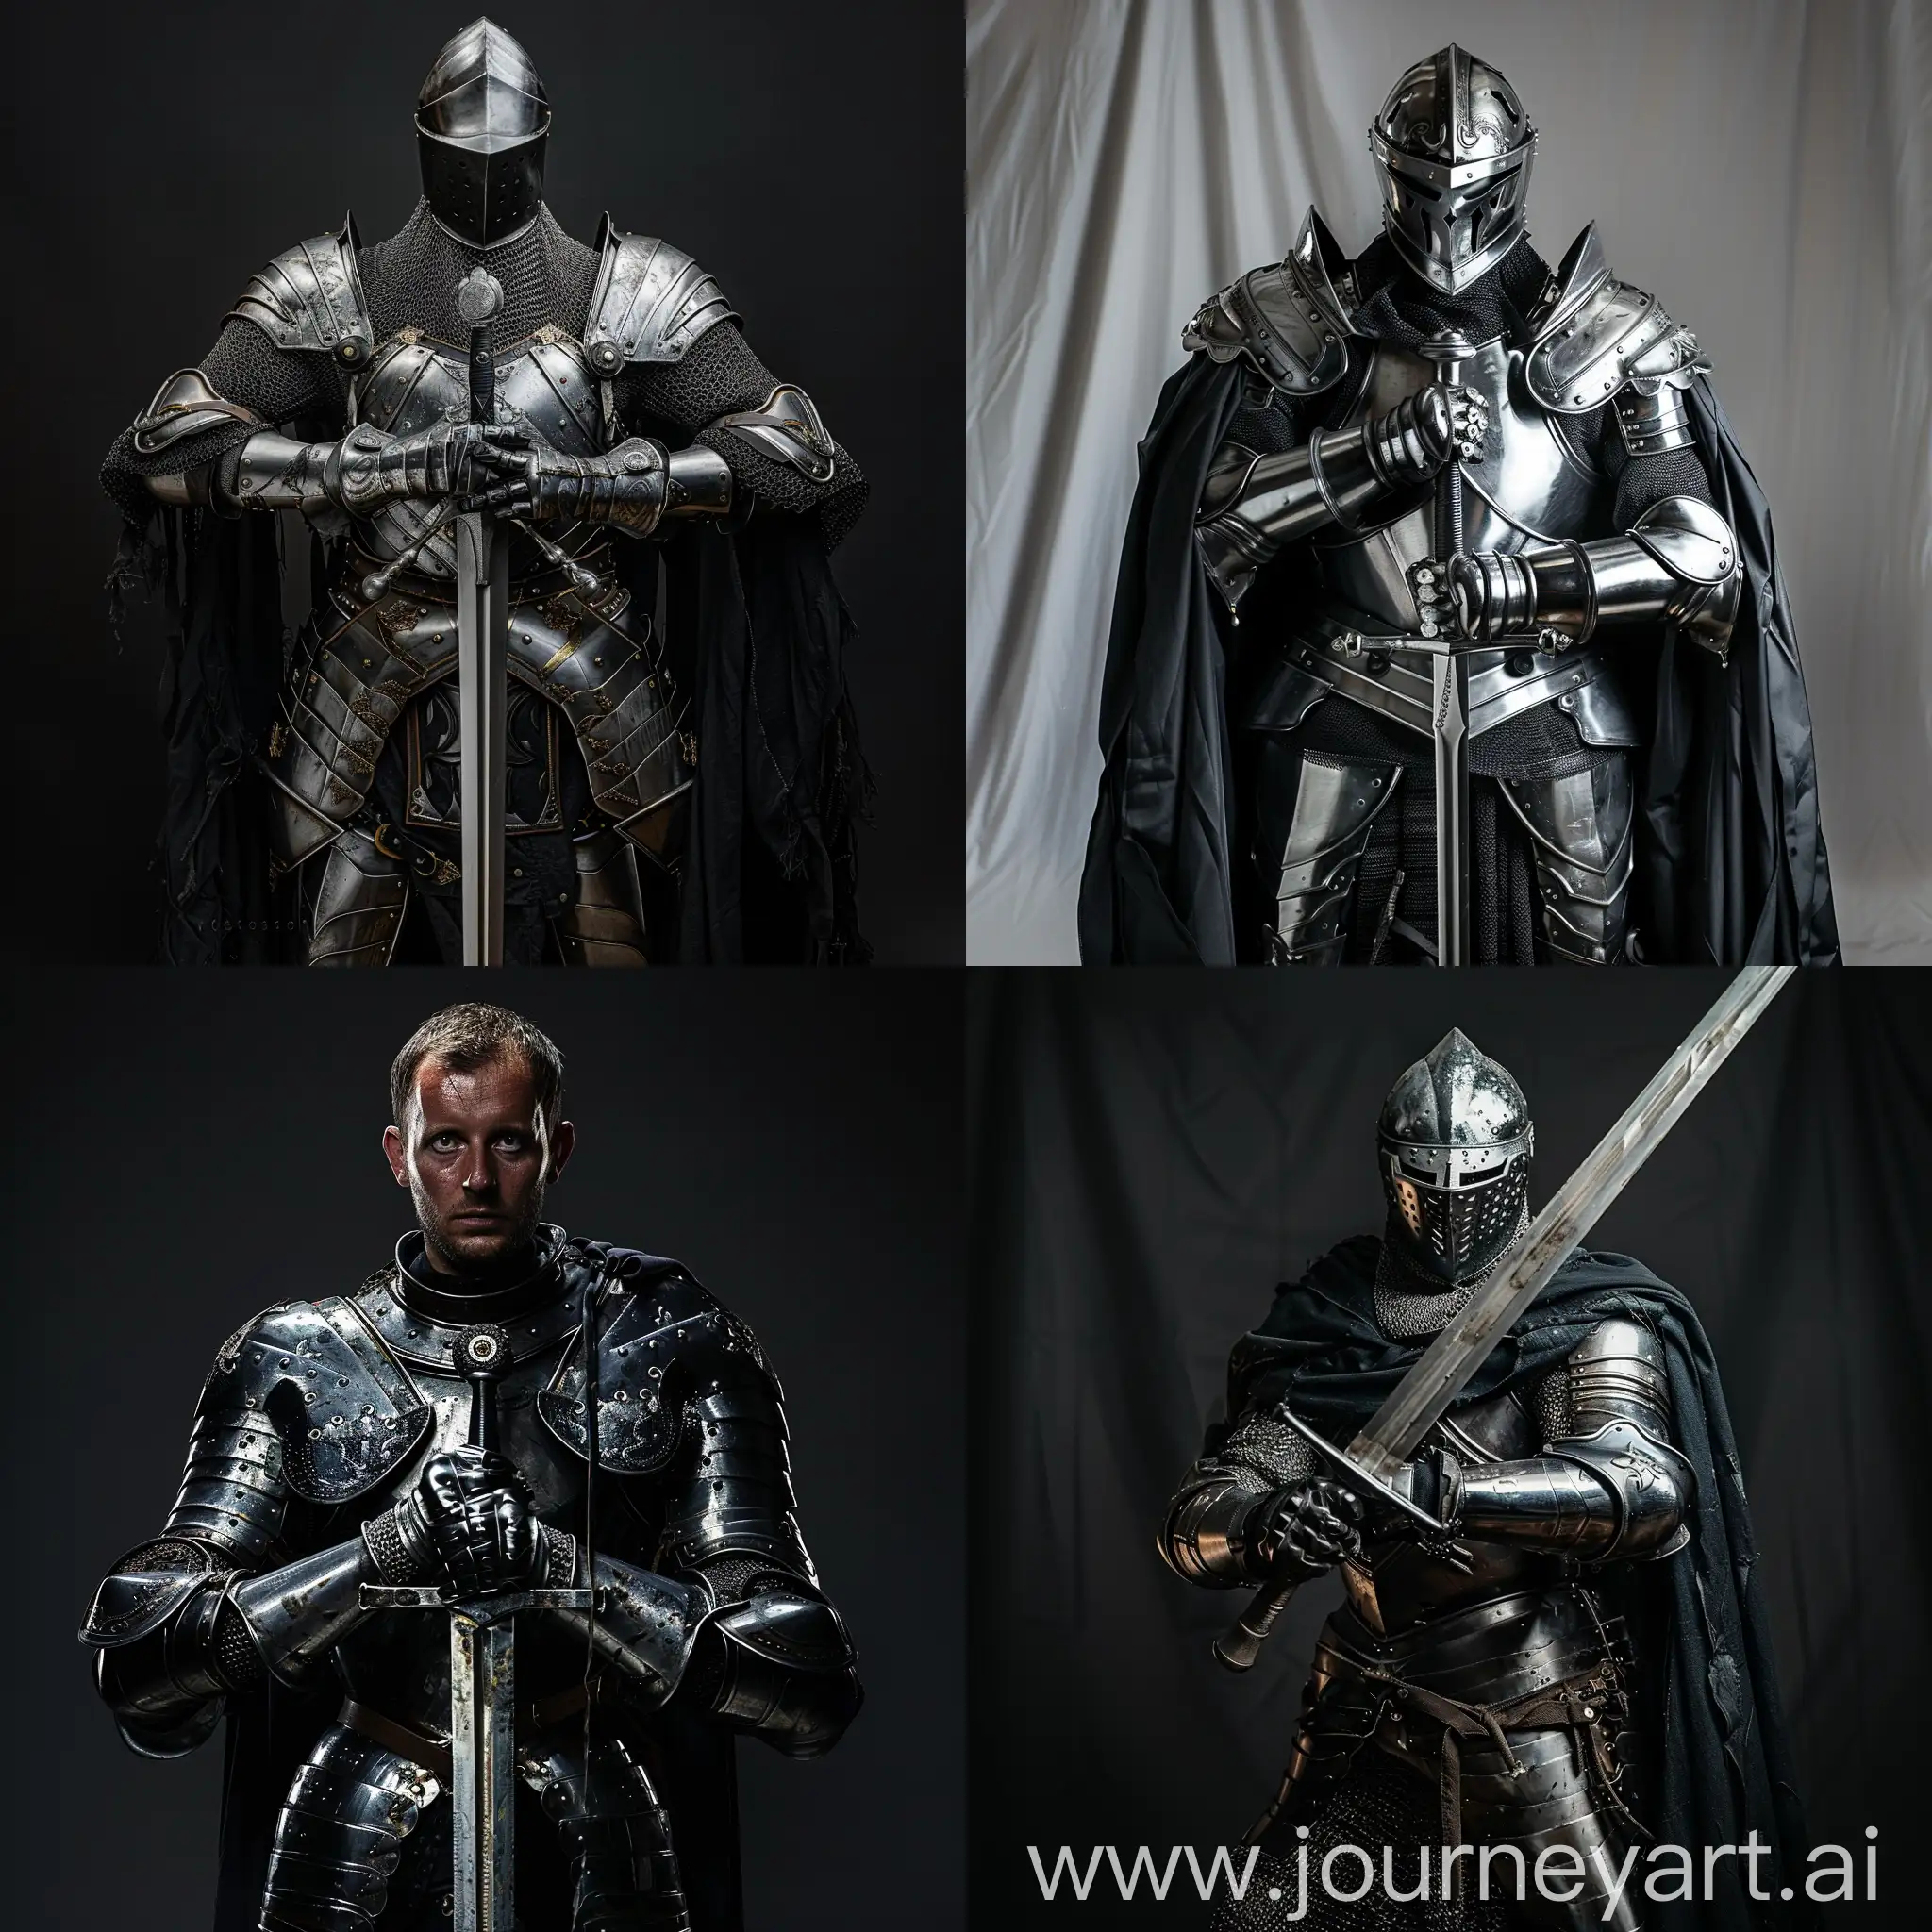 Medieval-Knight-in-Silver-Armor-with-TwoHanded-Sword